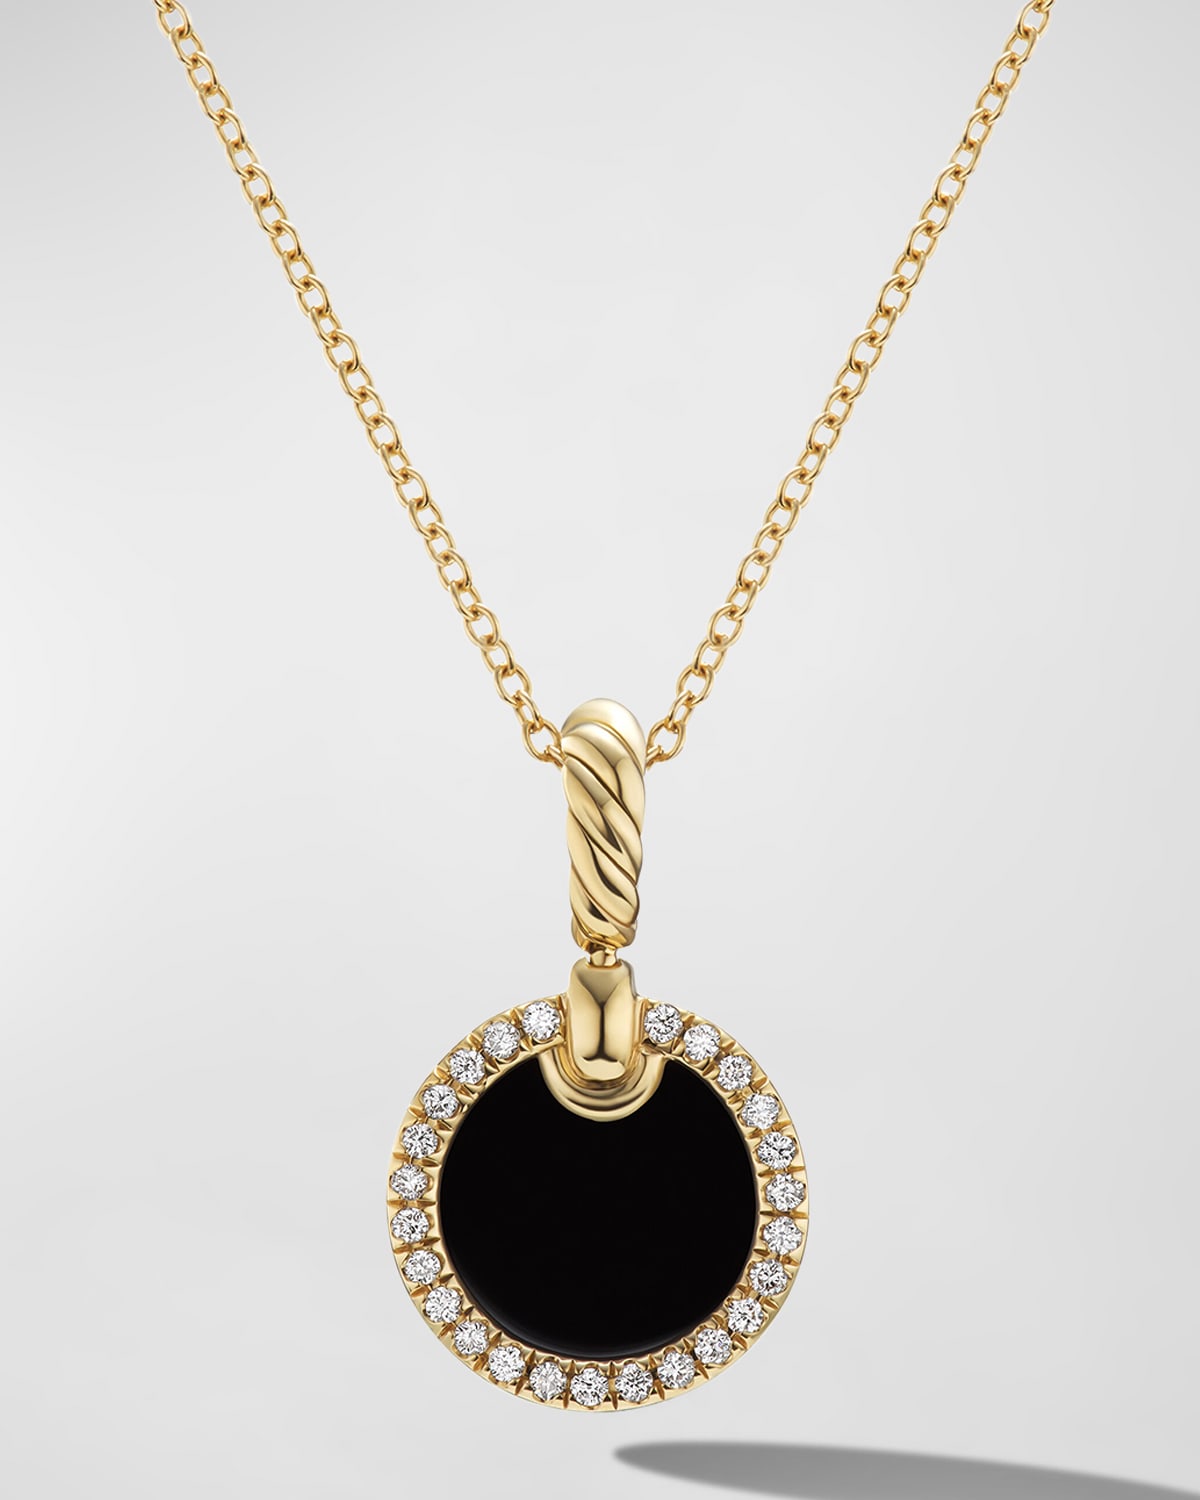 David Yurman Dy Elements Pendant Necklace With Gemstone And Diamonds In 18k Gold, 17.8mm, 16-18"l In Black Onyx